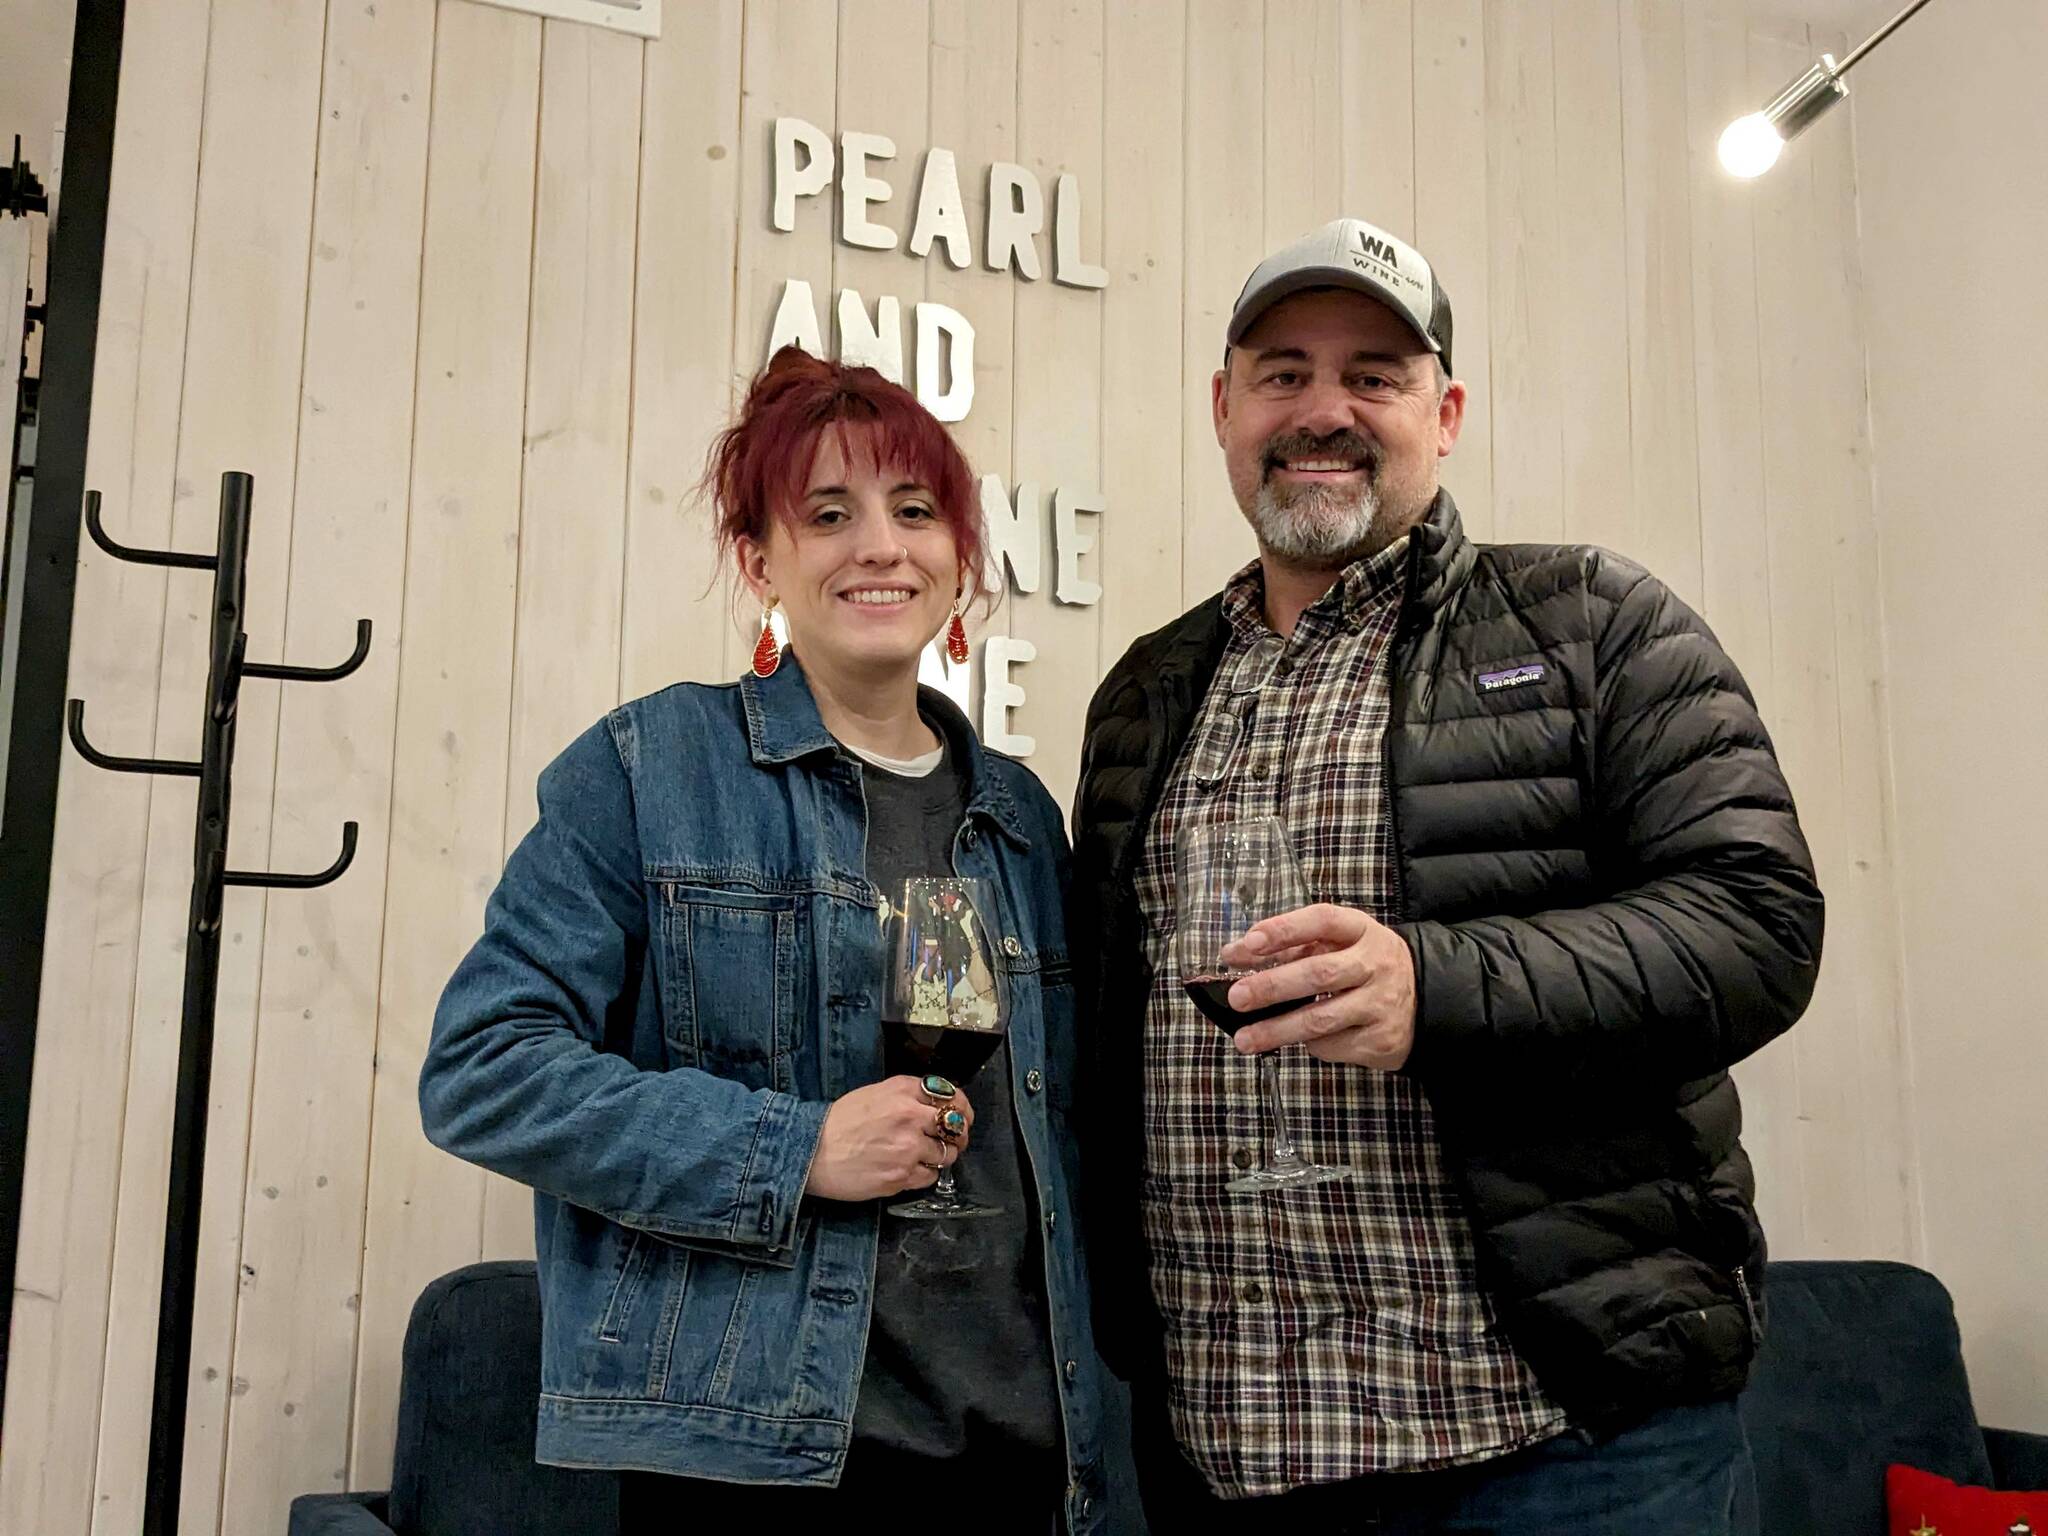 Pearl and Stone Wine Co. co-owner Paul Ribary stands with Tasting Room Manager Brie Cassidy. Photo Conor Wilson/Valley Record.